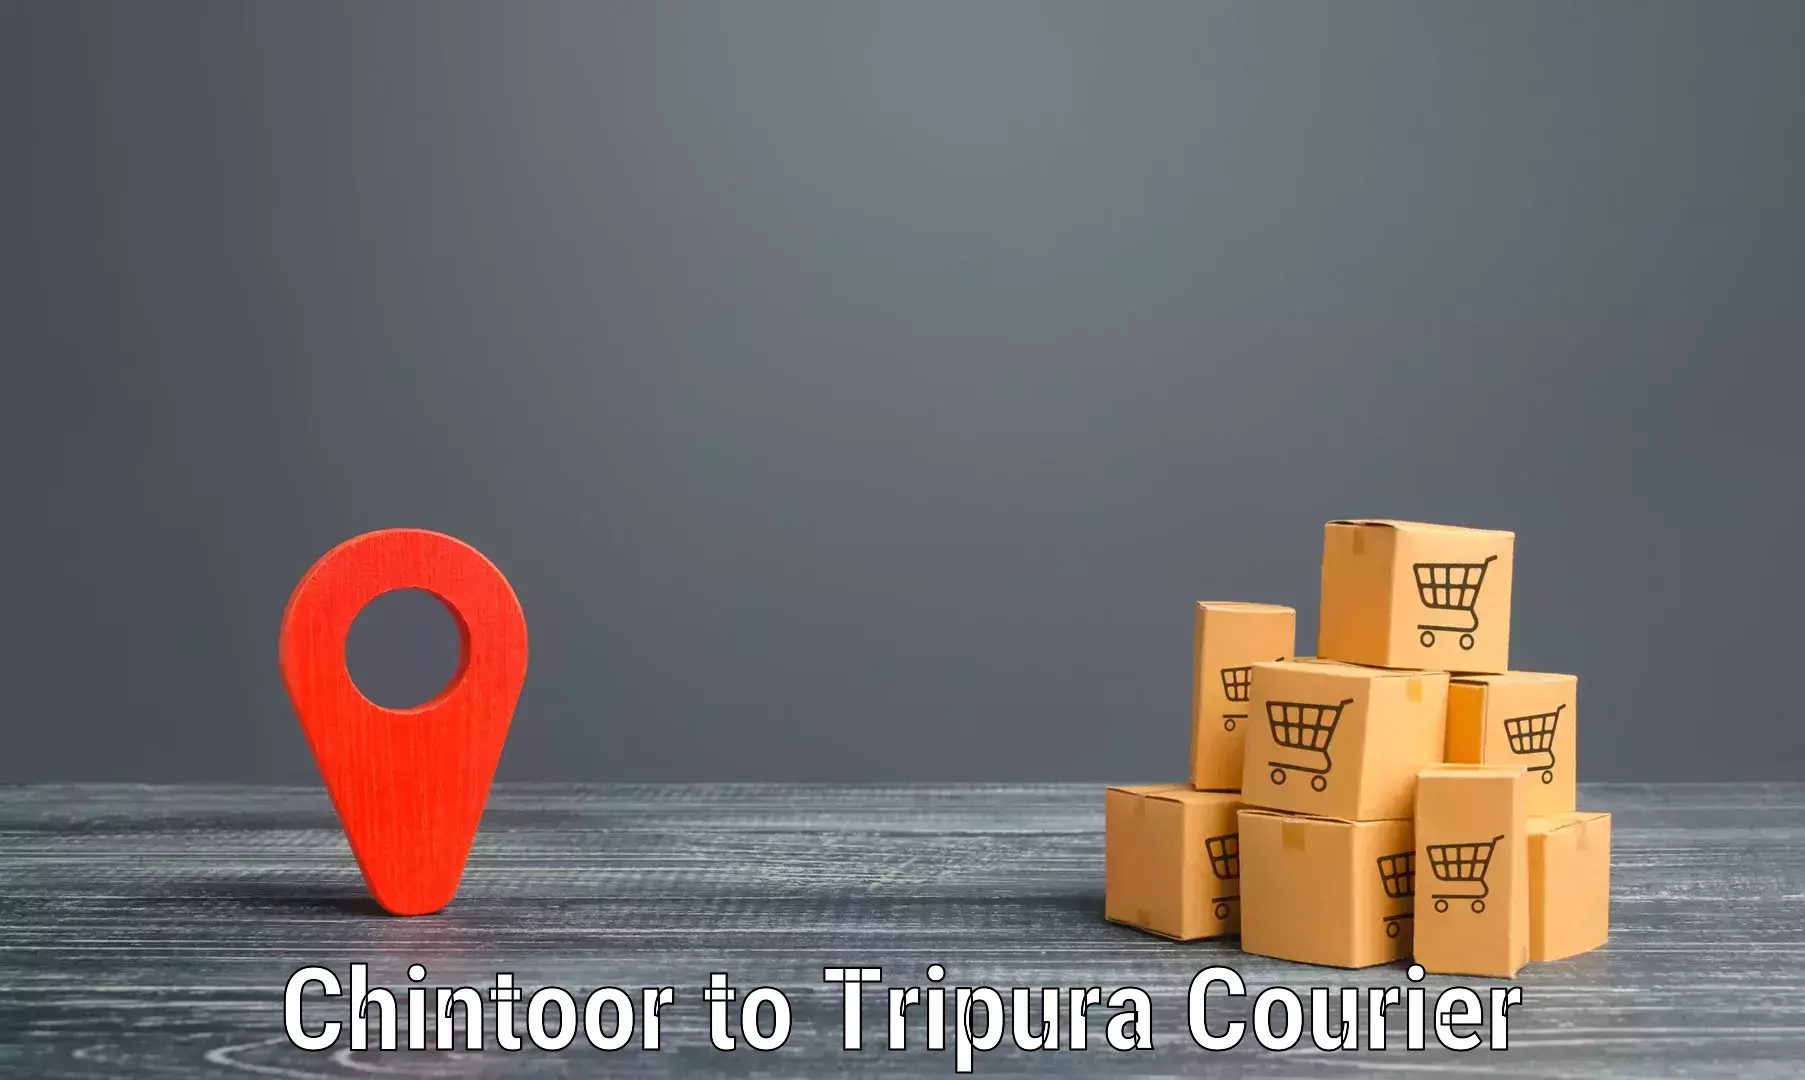 Next day courier Chintoor to Udaipur Tripura